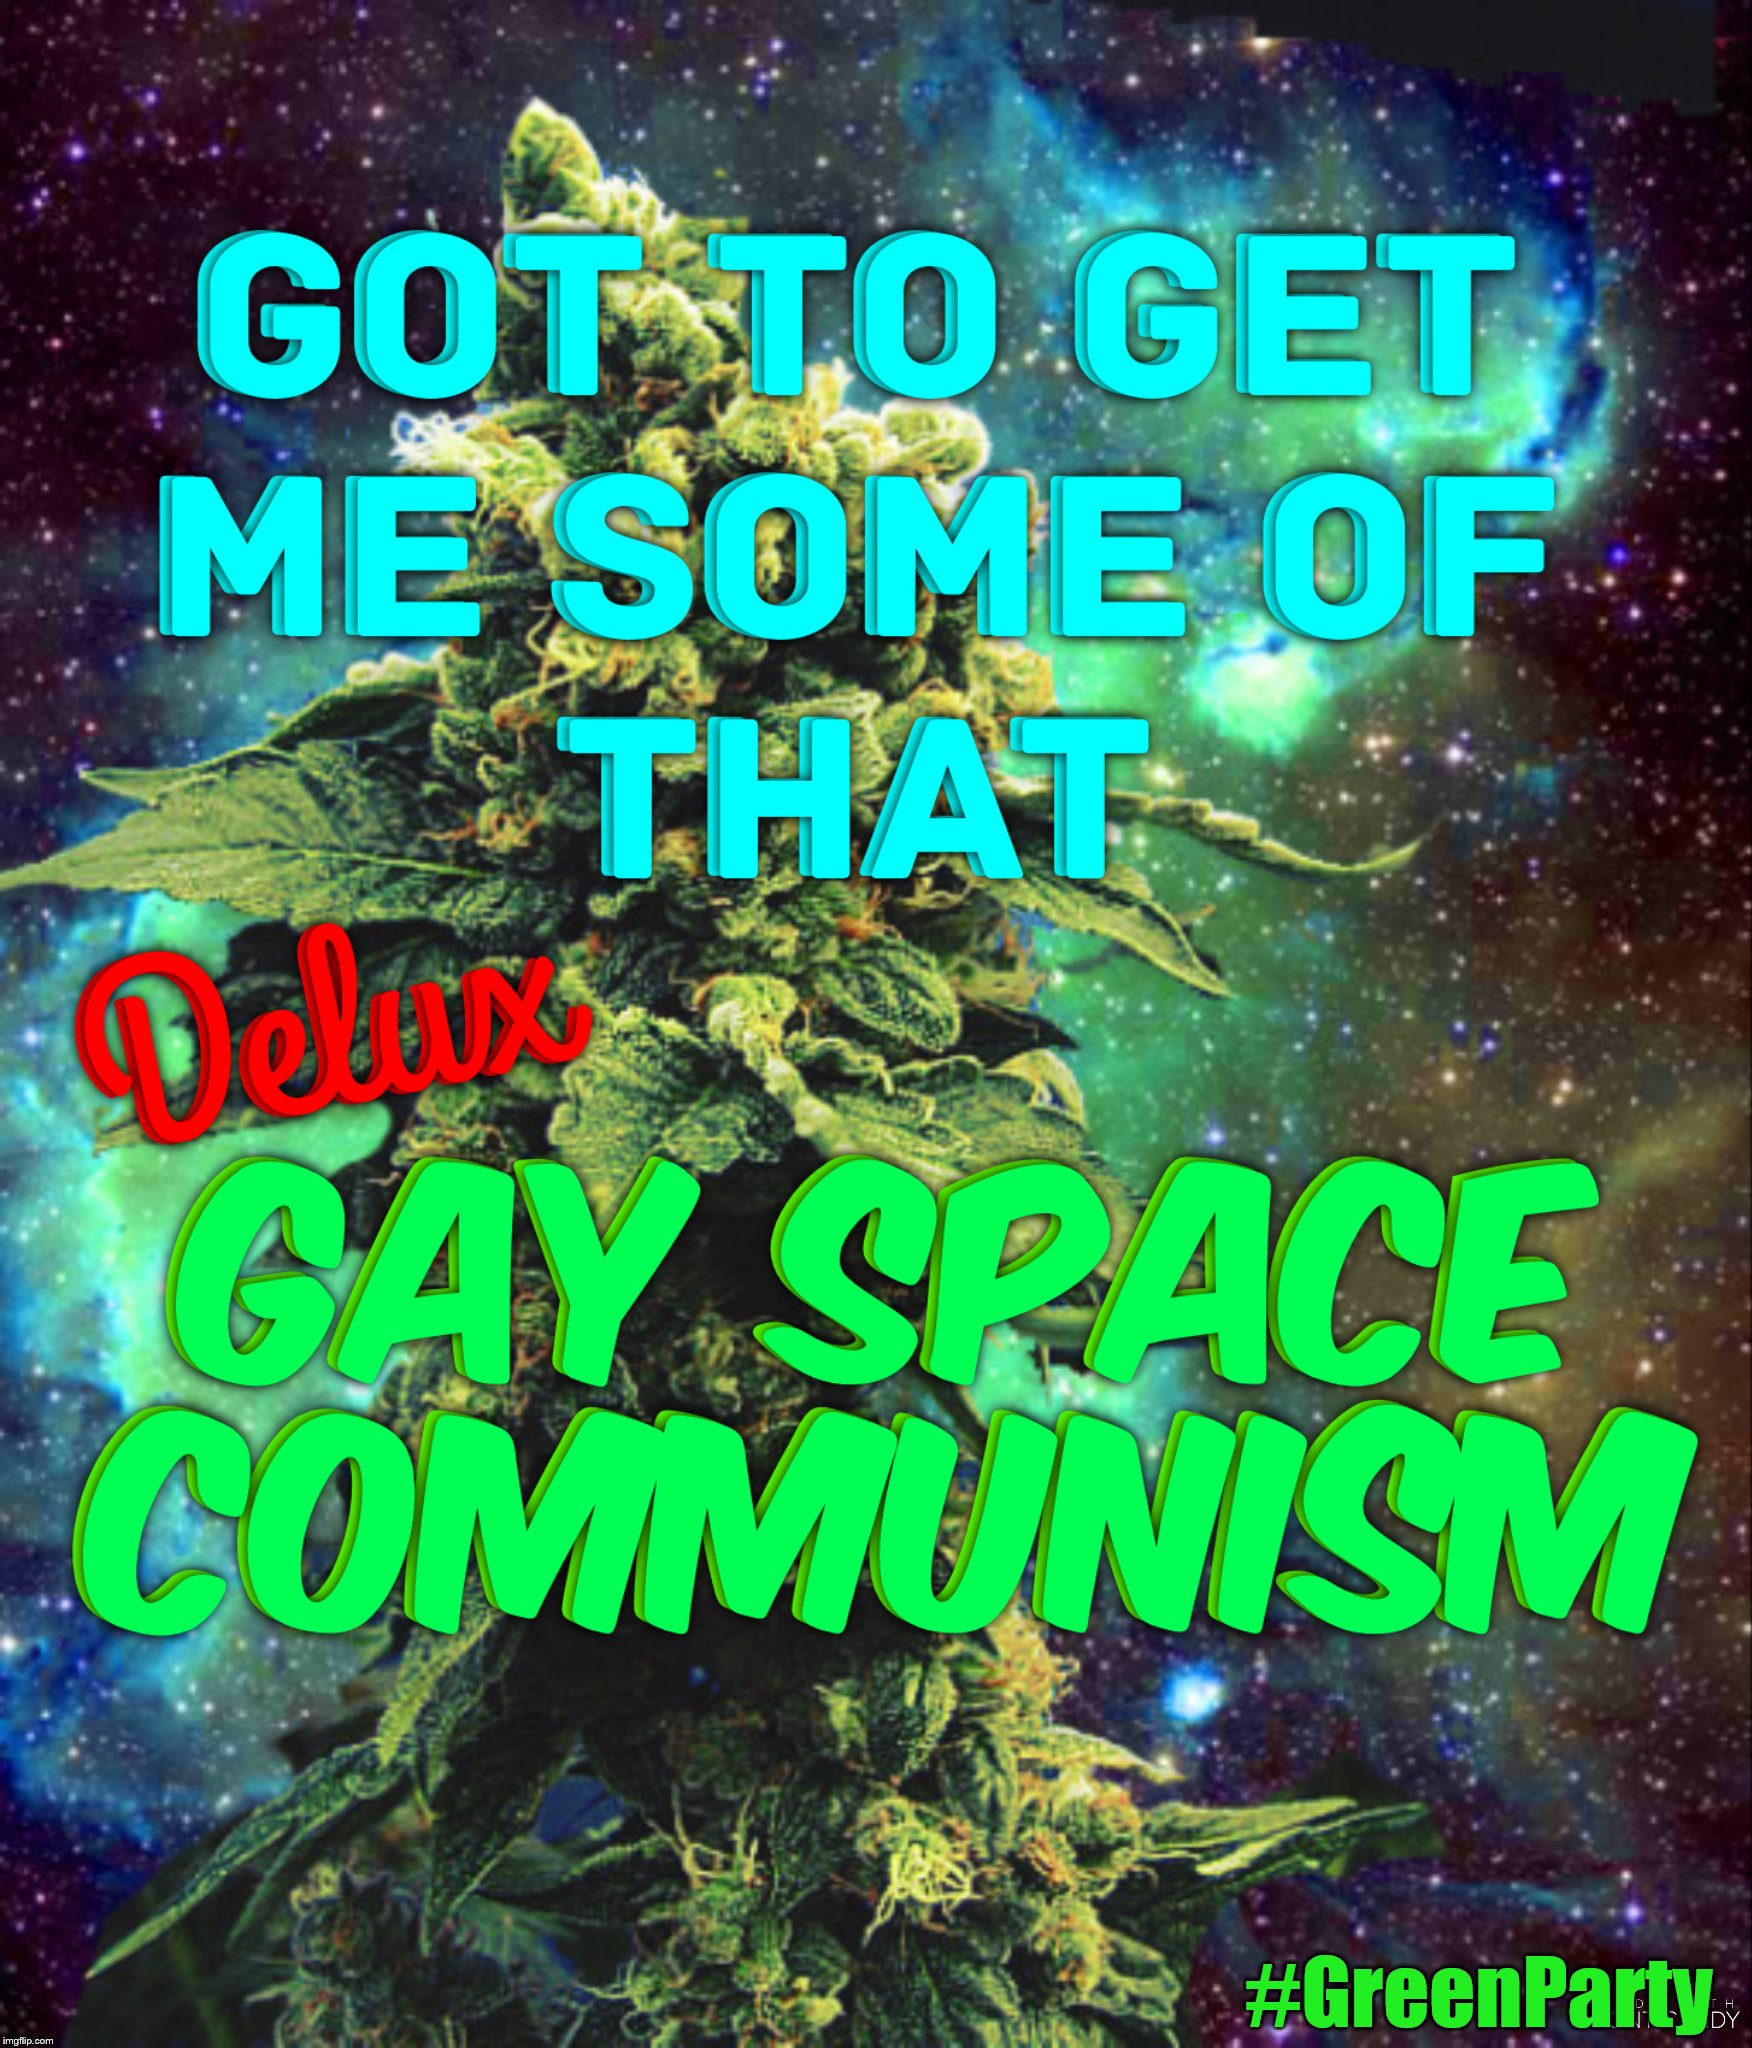 It's Out of this World! | #GreenParty | image tagged in space weed cone,green party,gay space communism | made w/ Imgflip meme maker